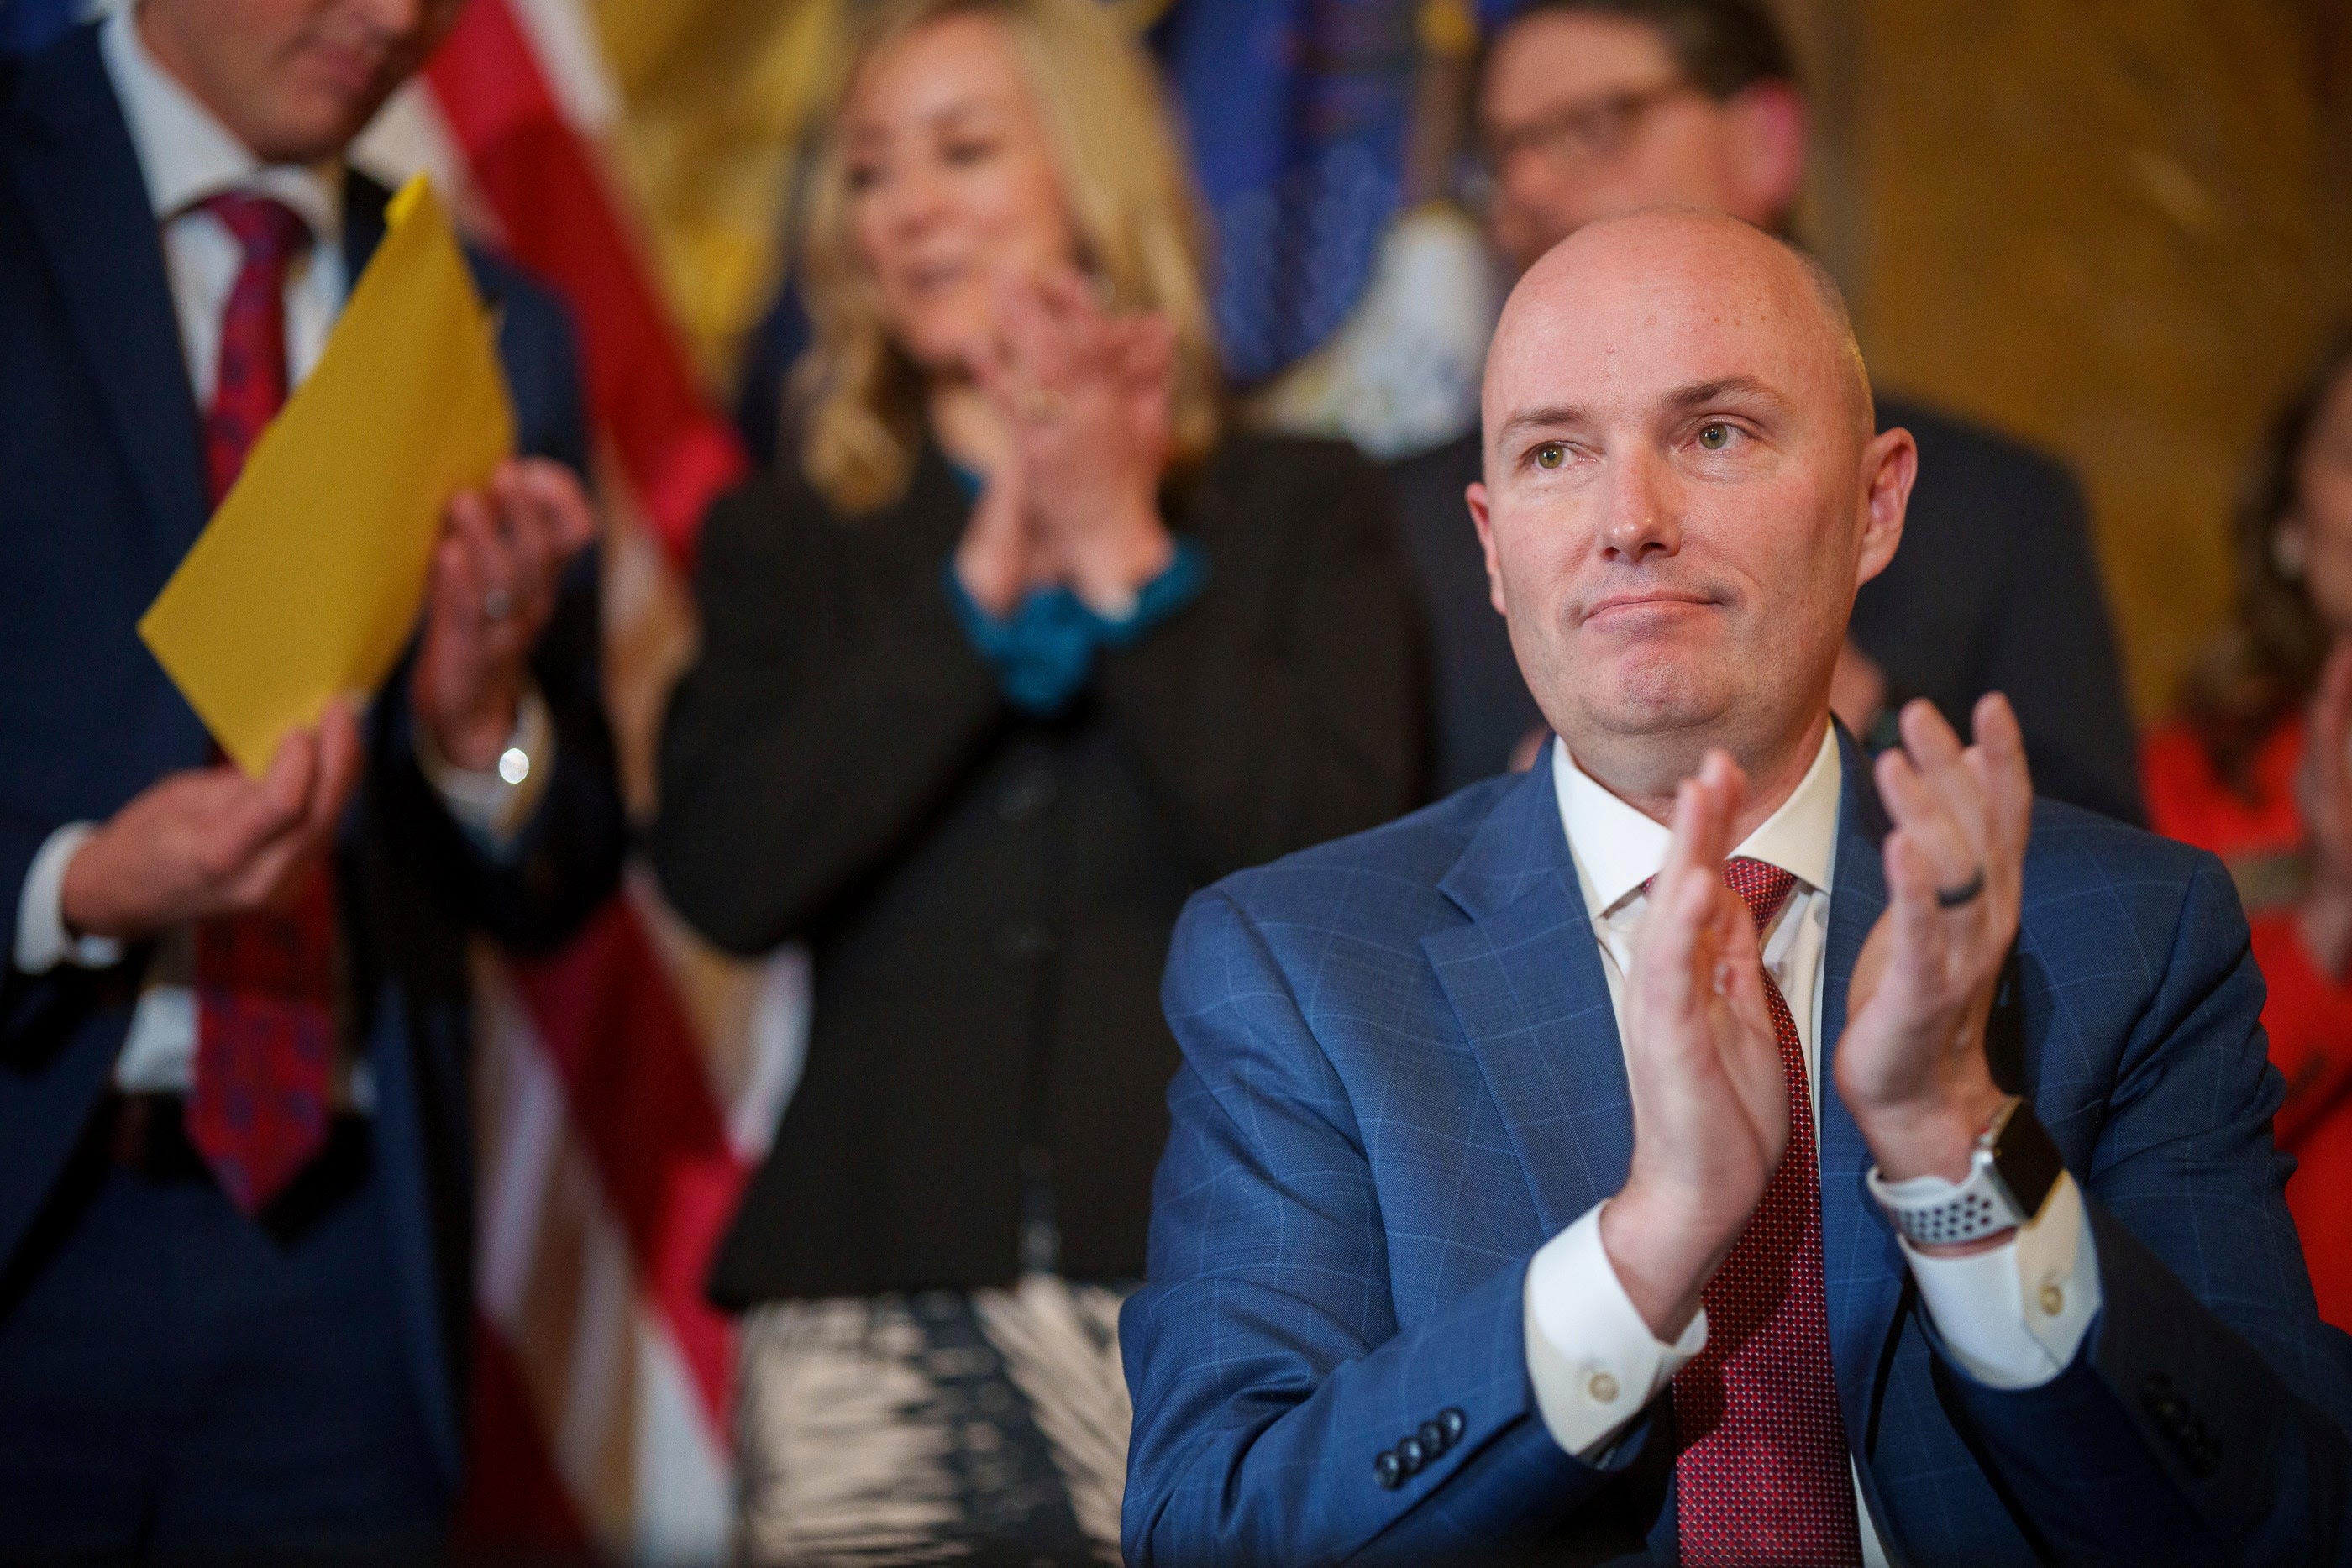 Spencer Cox wins Utah Republican primary for Governor